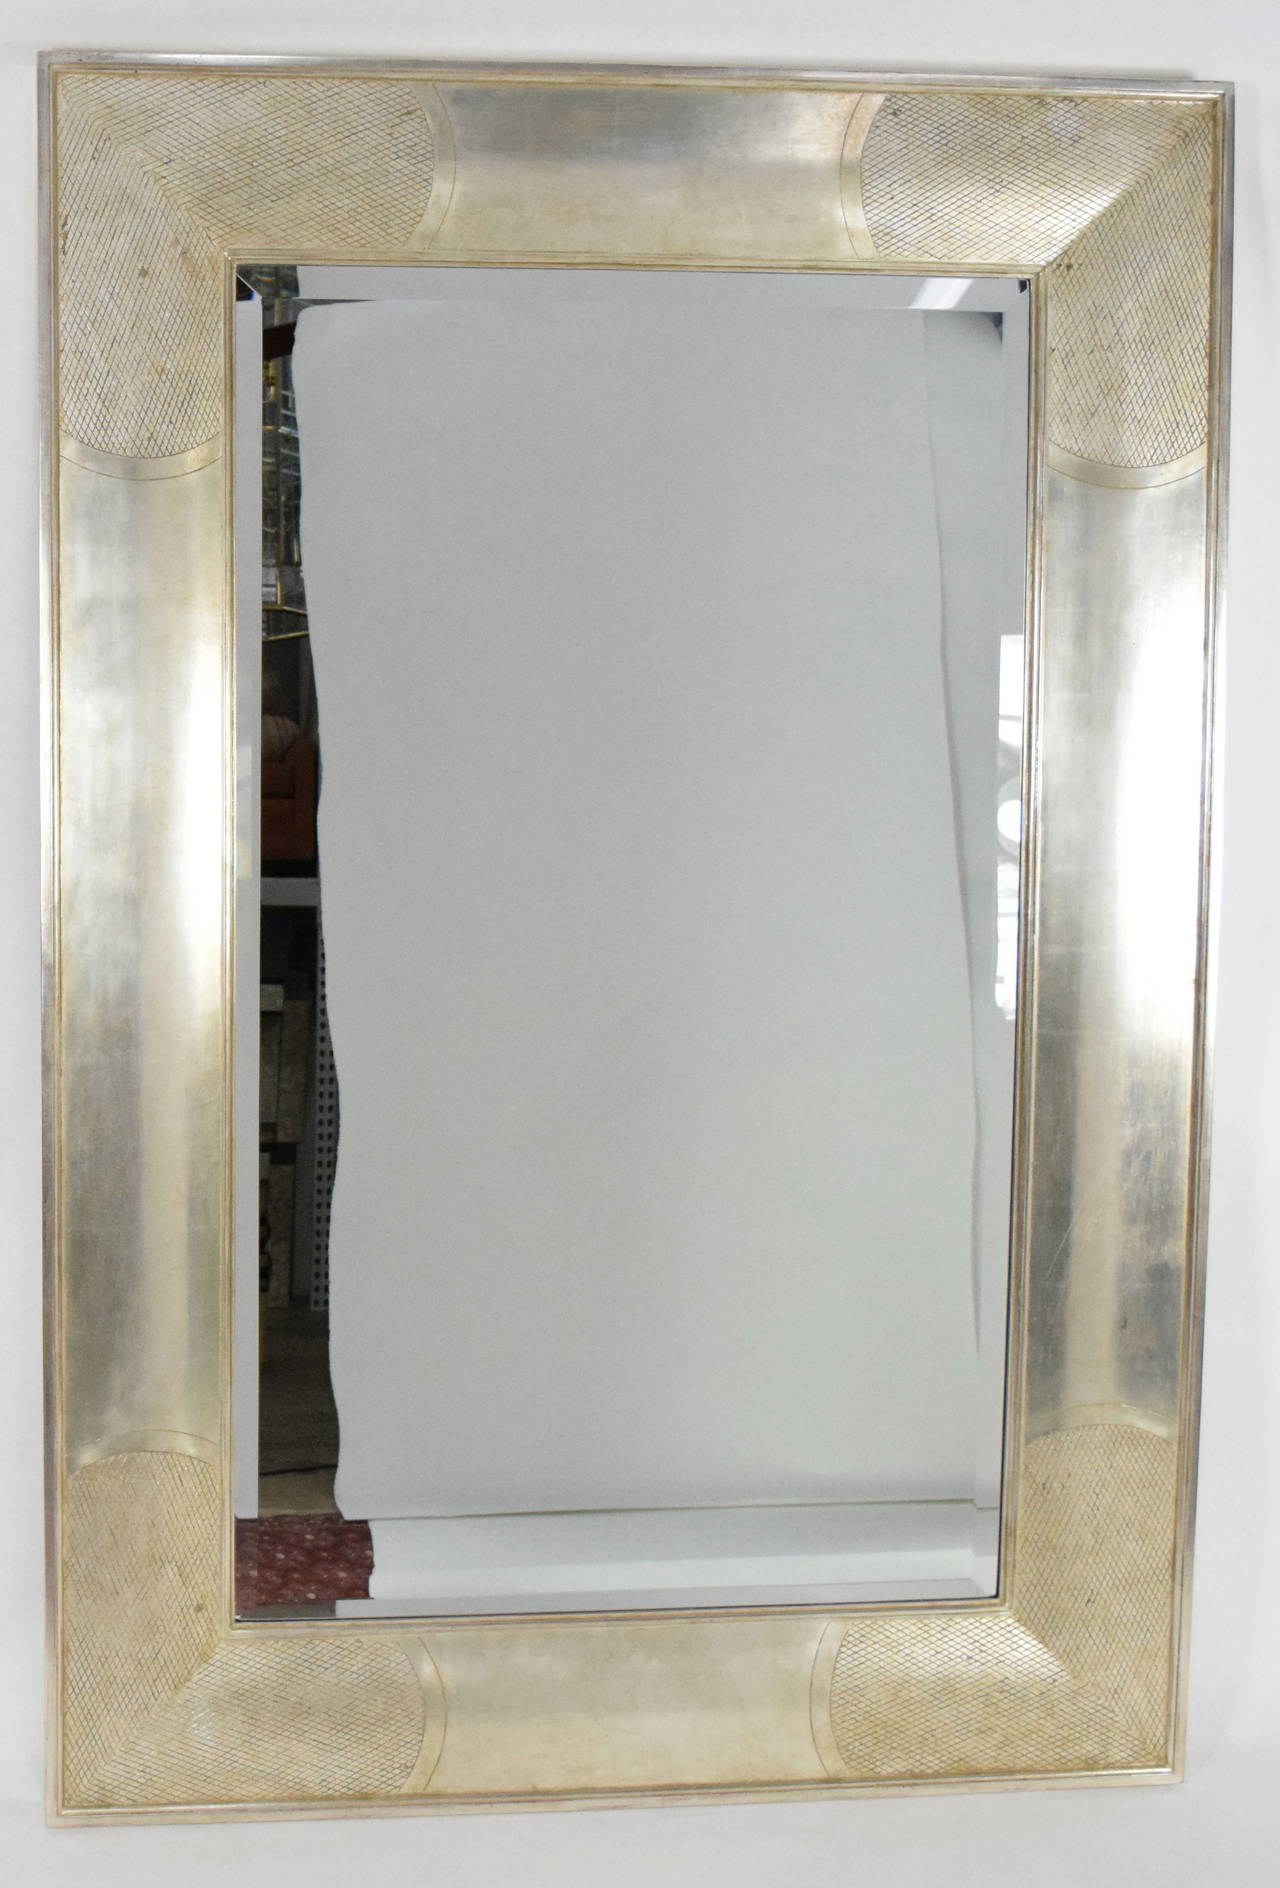 This is the English II mirror by Sally Sirkin Lewis for J. Robert Scott. It is in a silver leaf finish. The mirror came from a Palm Springs estate. Original net pricing on mirror is $9,000+.